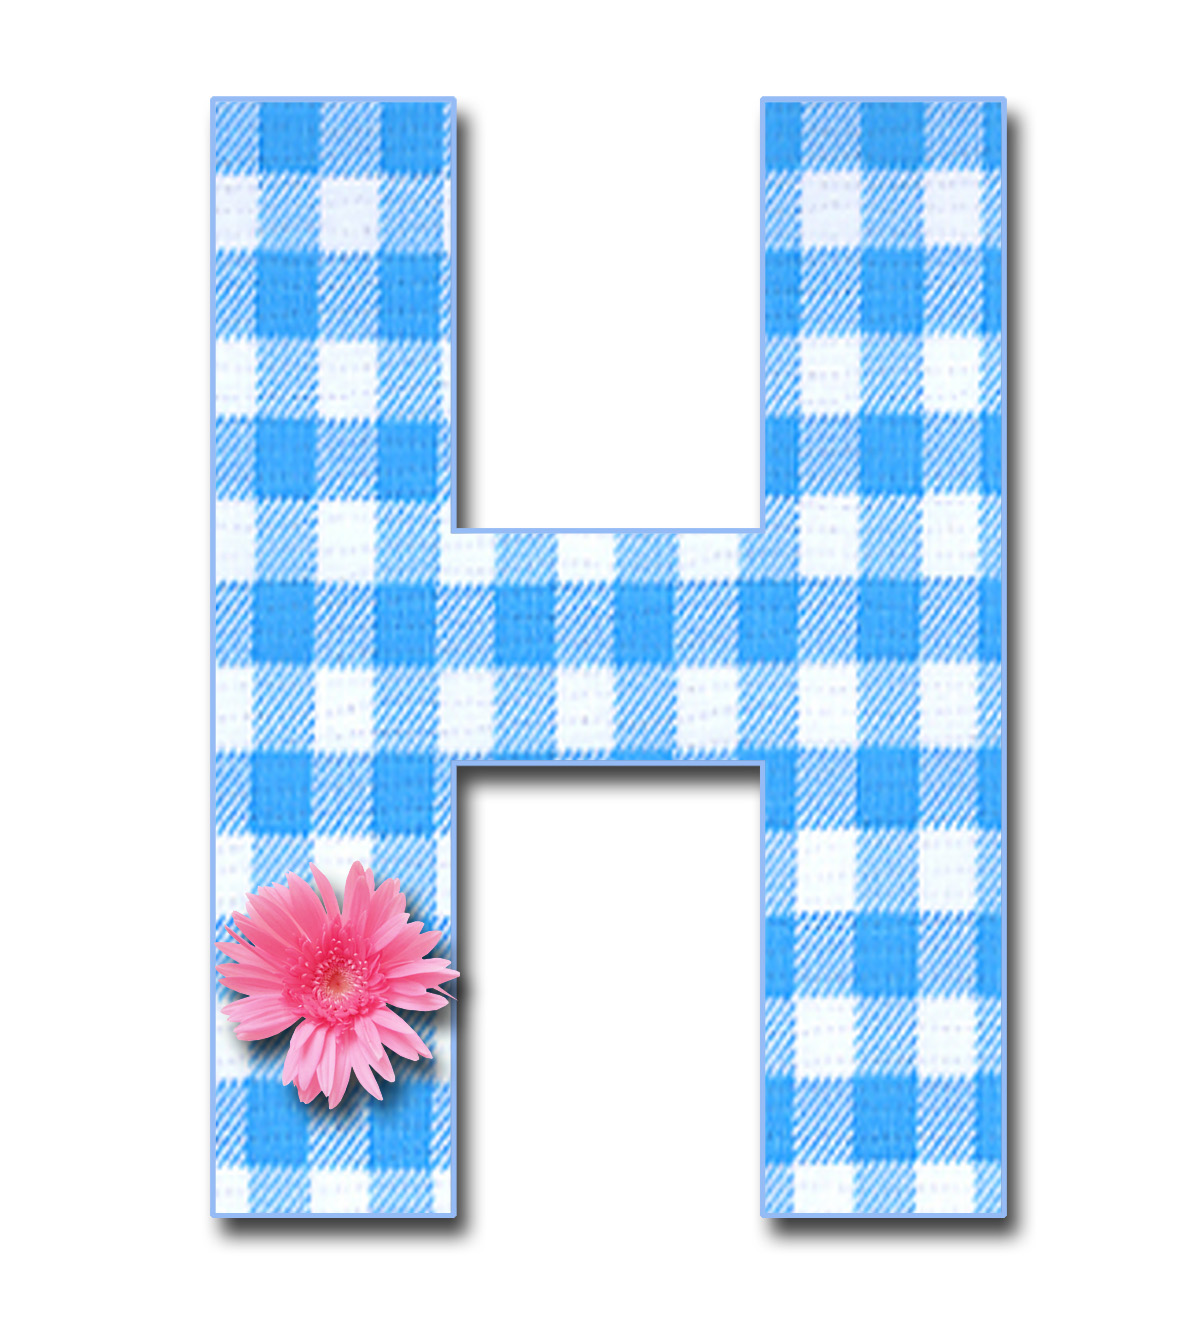 all h alphabet wallpapers for mobile phone mobile wallpaper